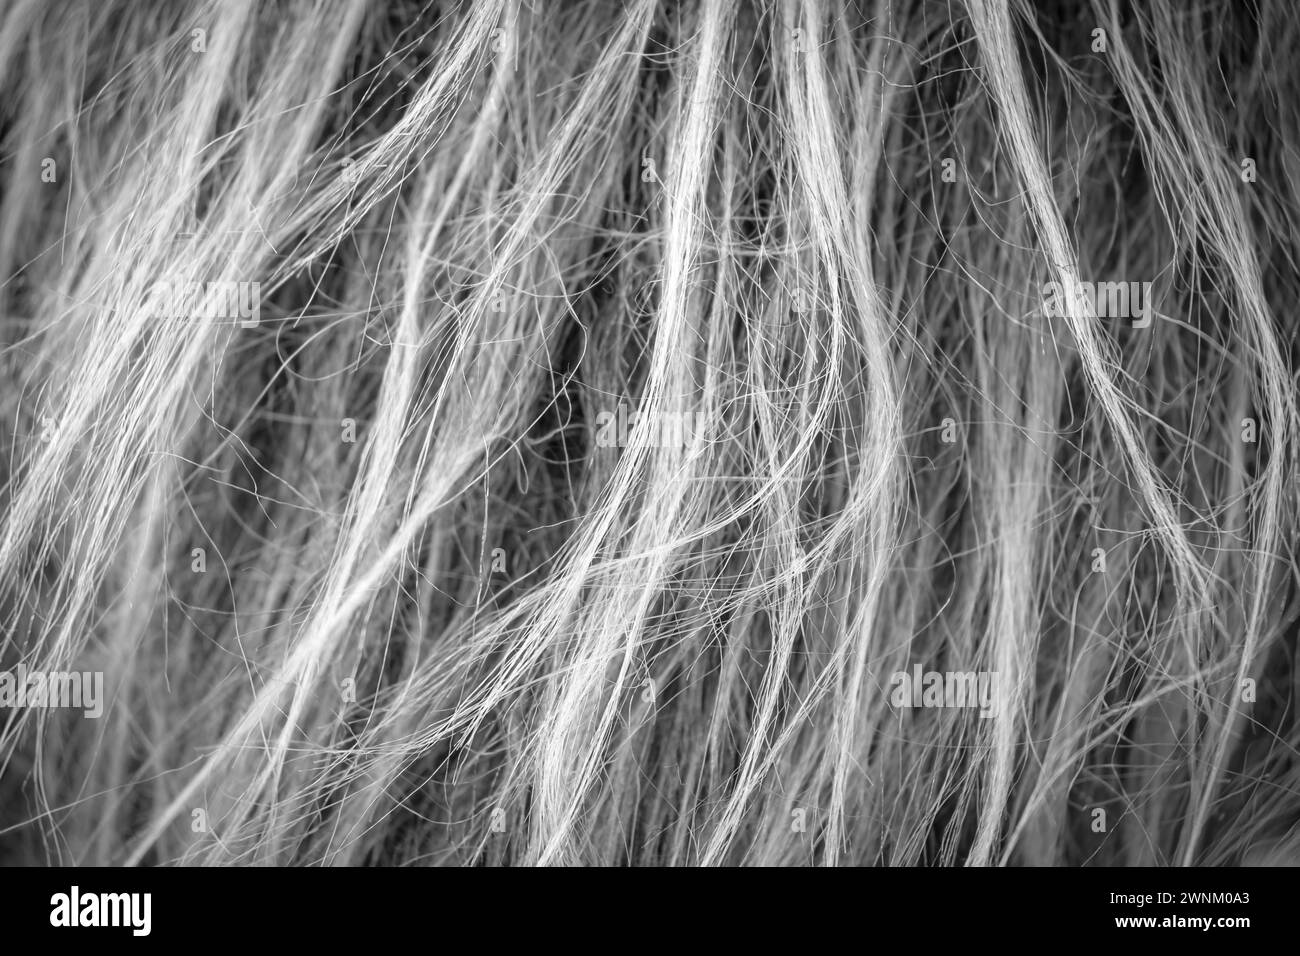 Dry and messy hair in close up view Stock Photo